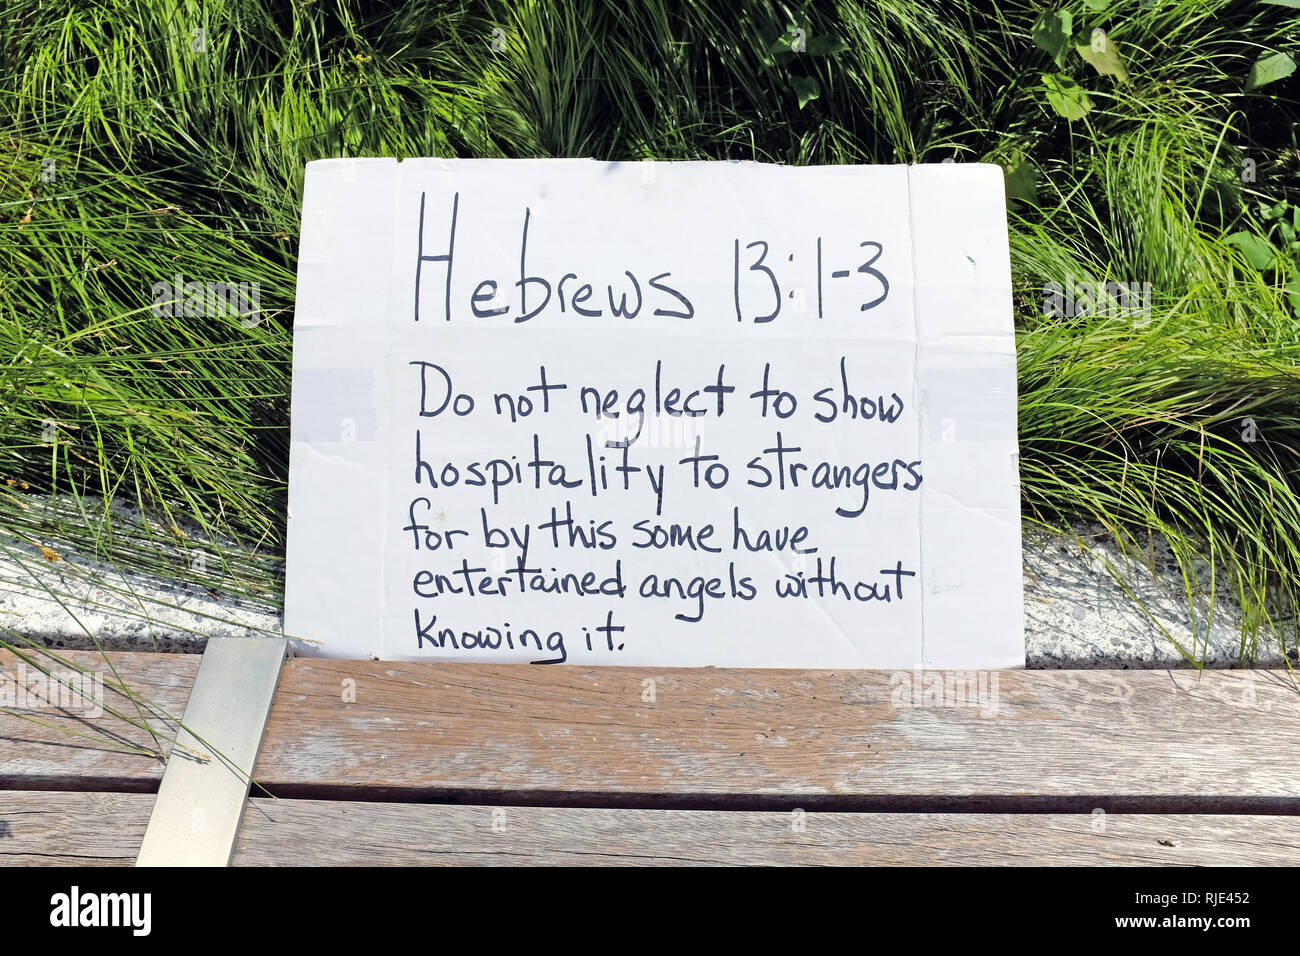 A placard on which is written Hebrews 13:1-3 about showing hospitality to strangers is on display at a pro-immigrant rally in Cleveland, Ohio, USA. Stock Photo